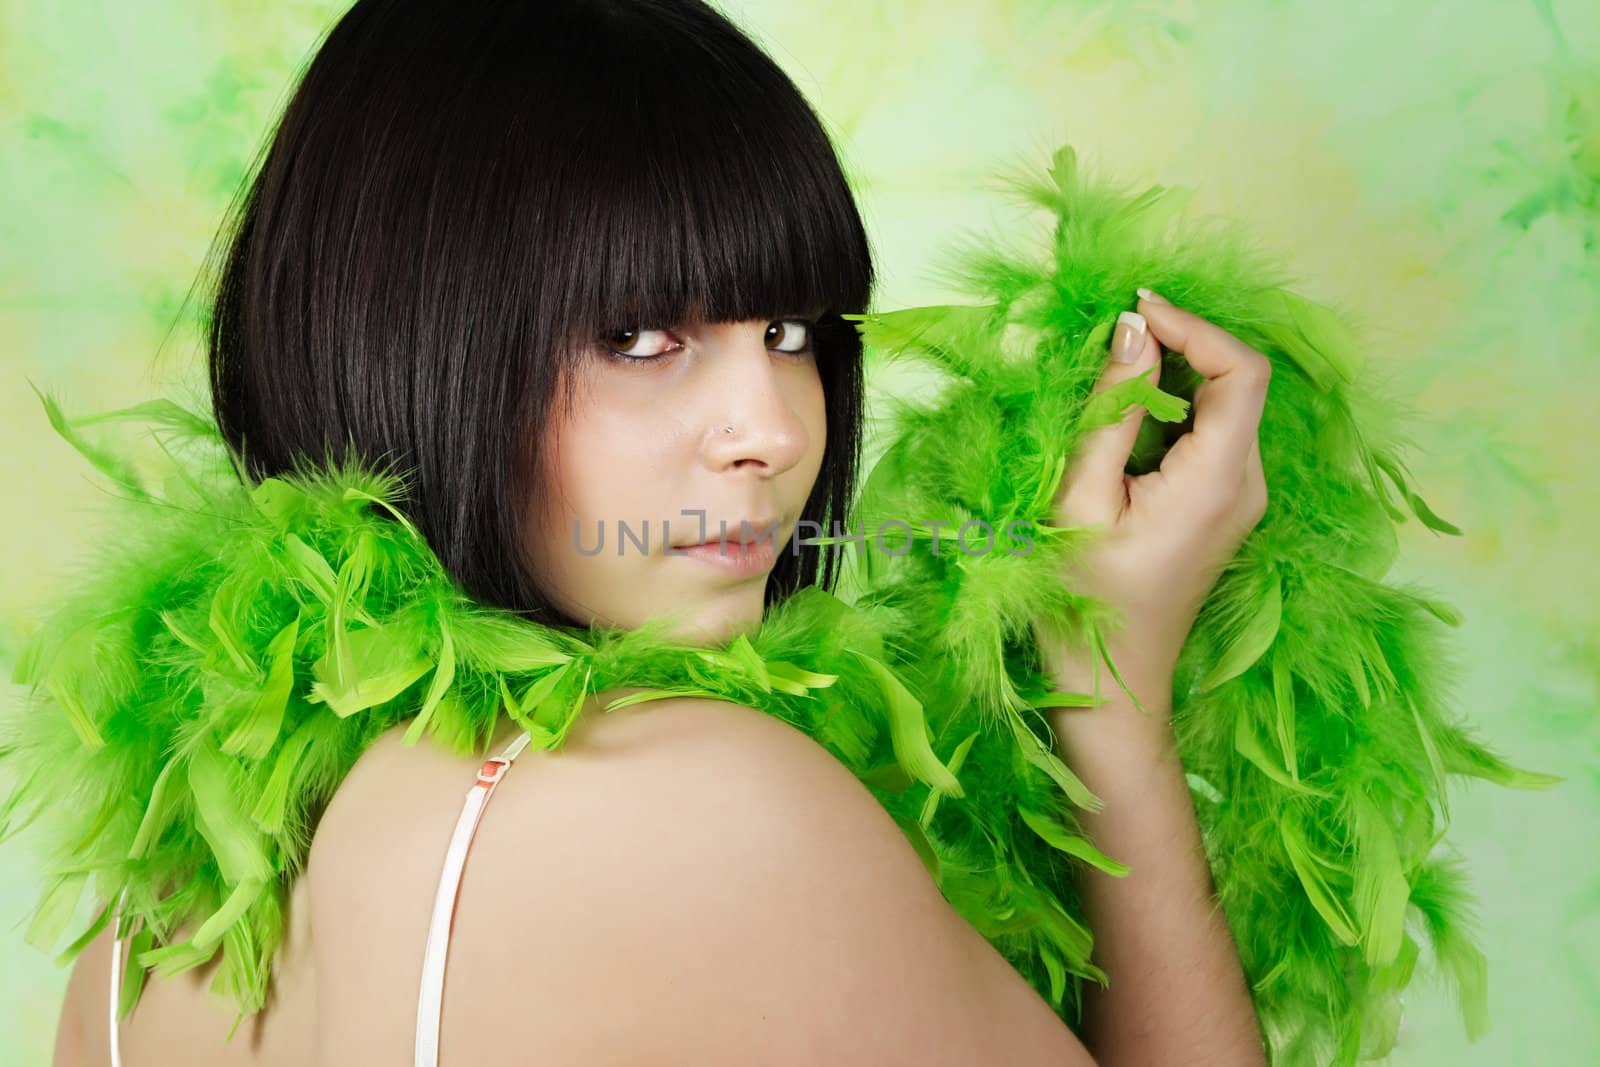 portrait of pretty teen girl with green feather boa